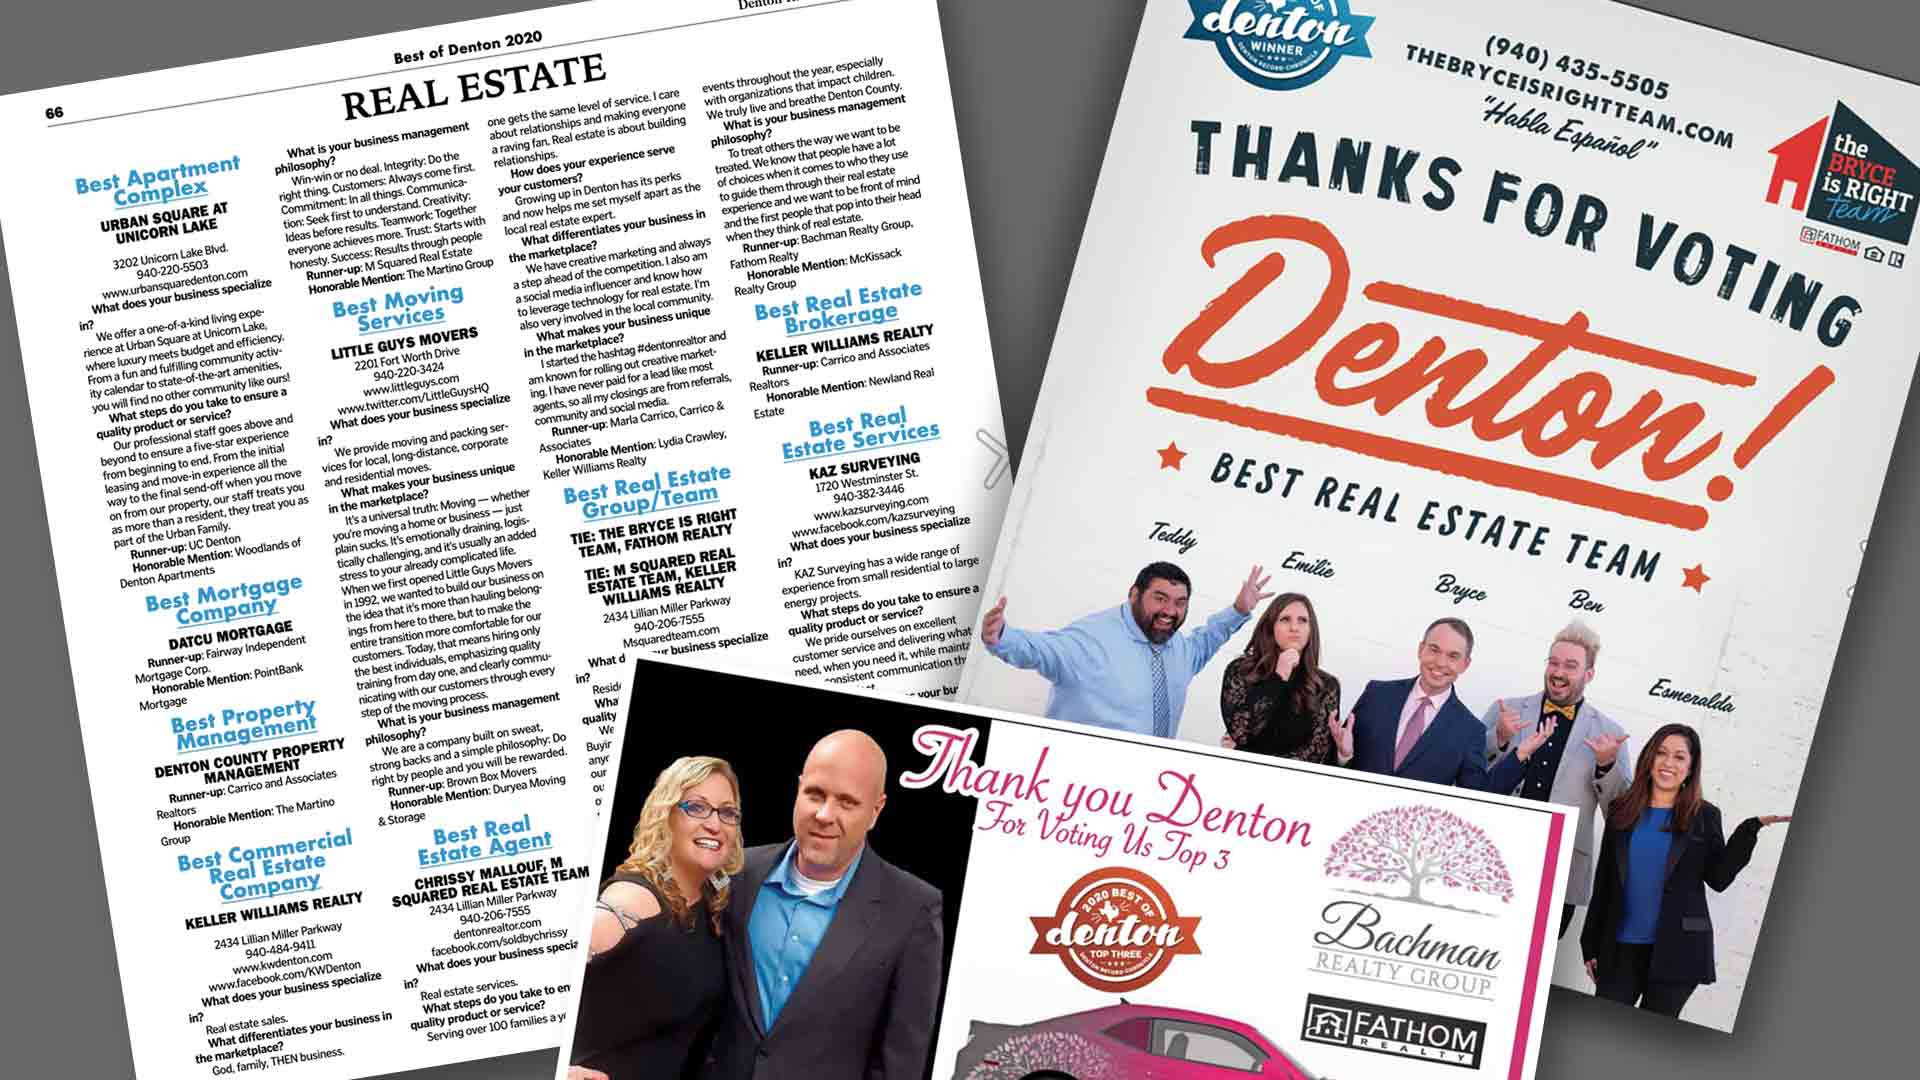 Featured image for “Fathom Teams Named 1st & 2nd in “Best of” Among County Real Estate Teams”